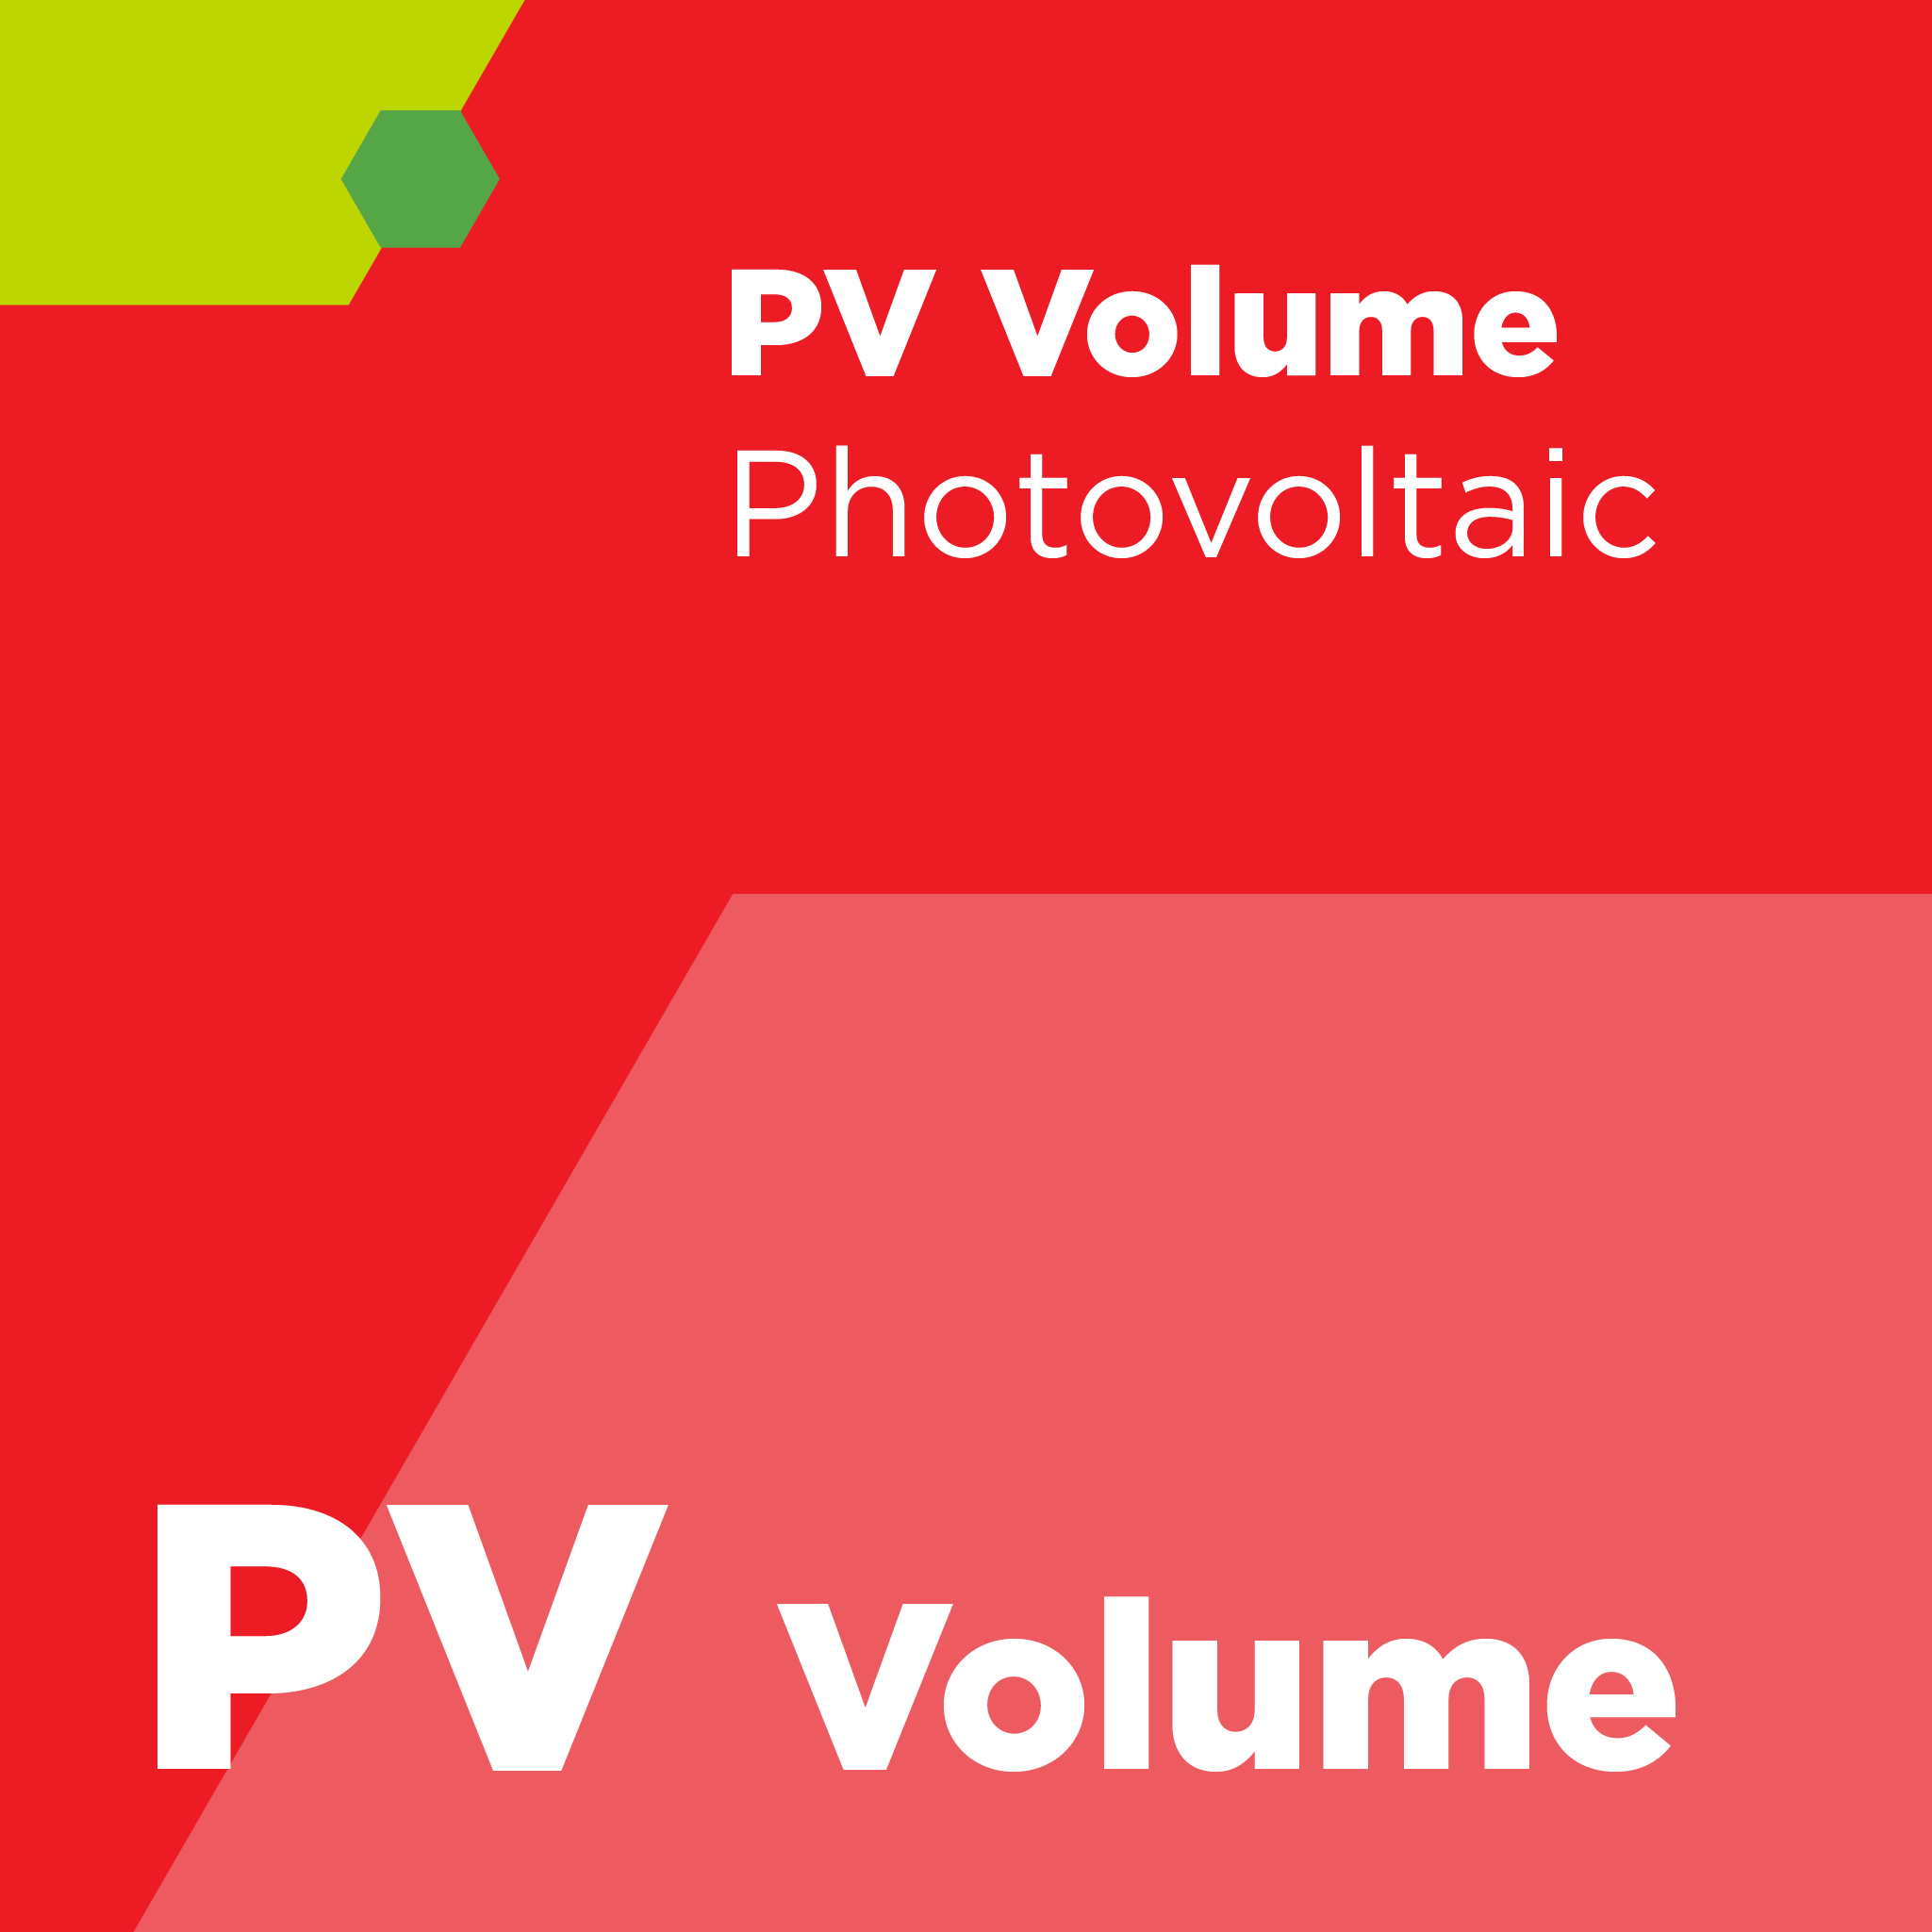 PV00500 - SEMI PV5 - Guide for Oxygen (O2), Bulk, Used in Photovoltaic Applications